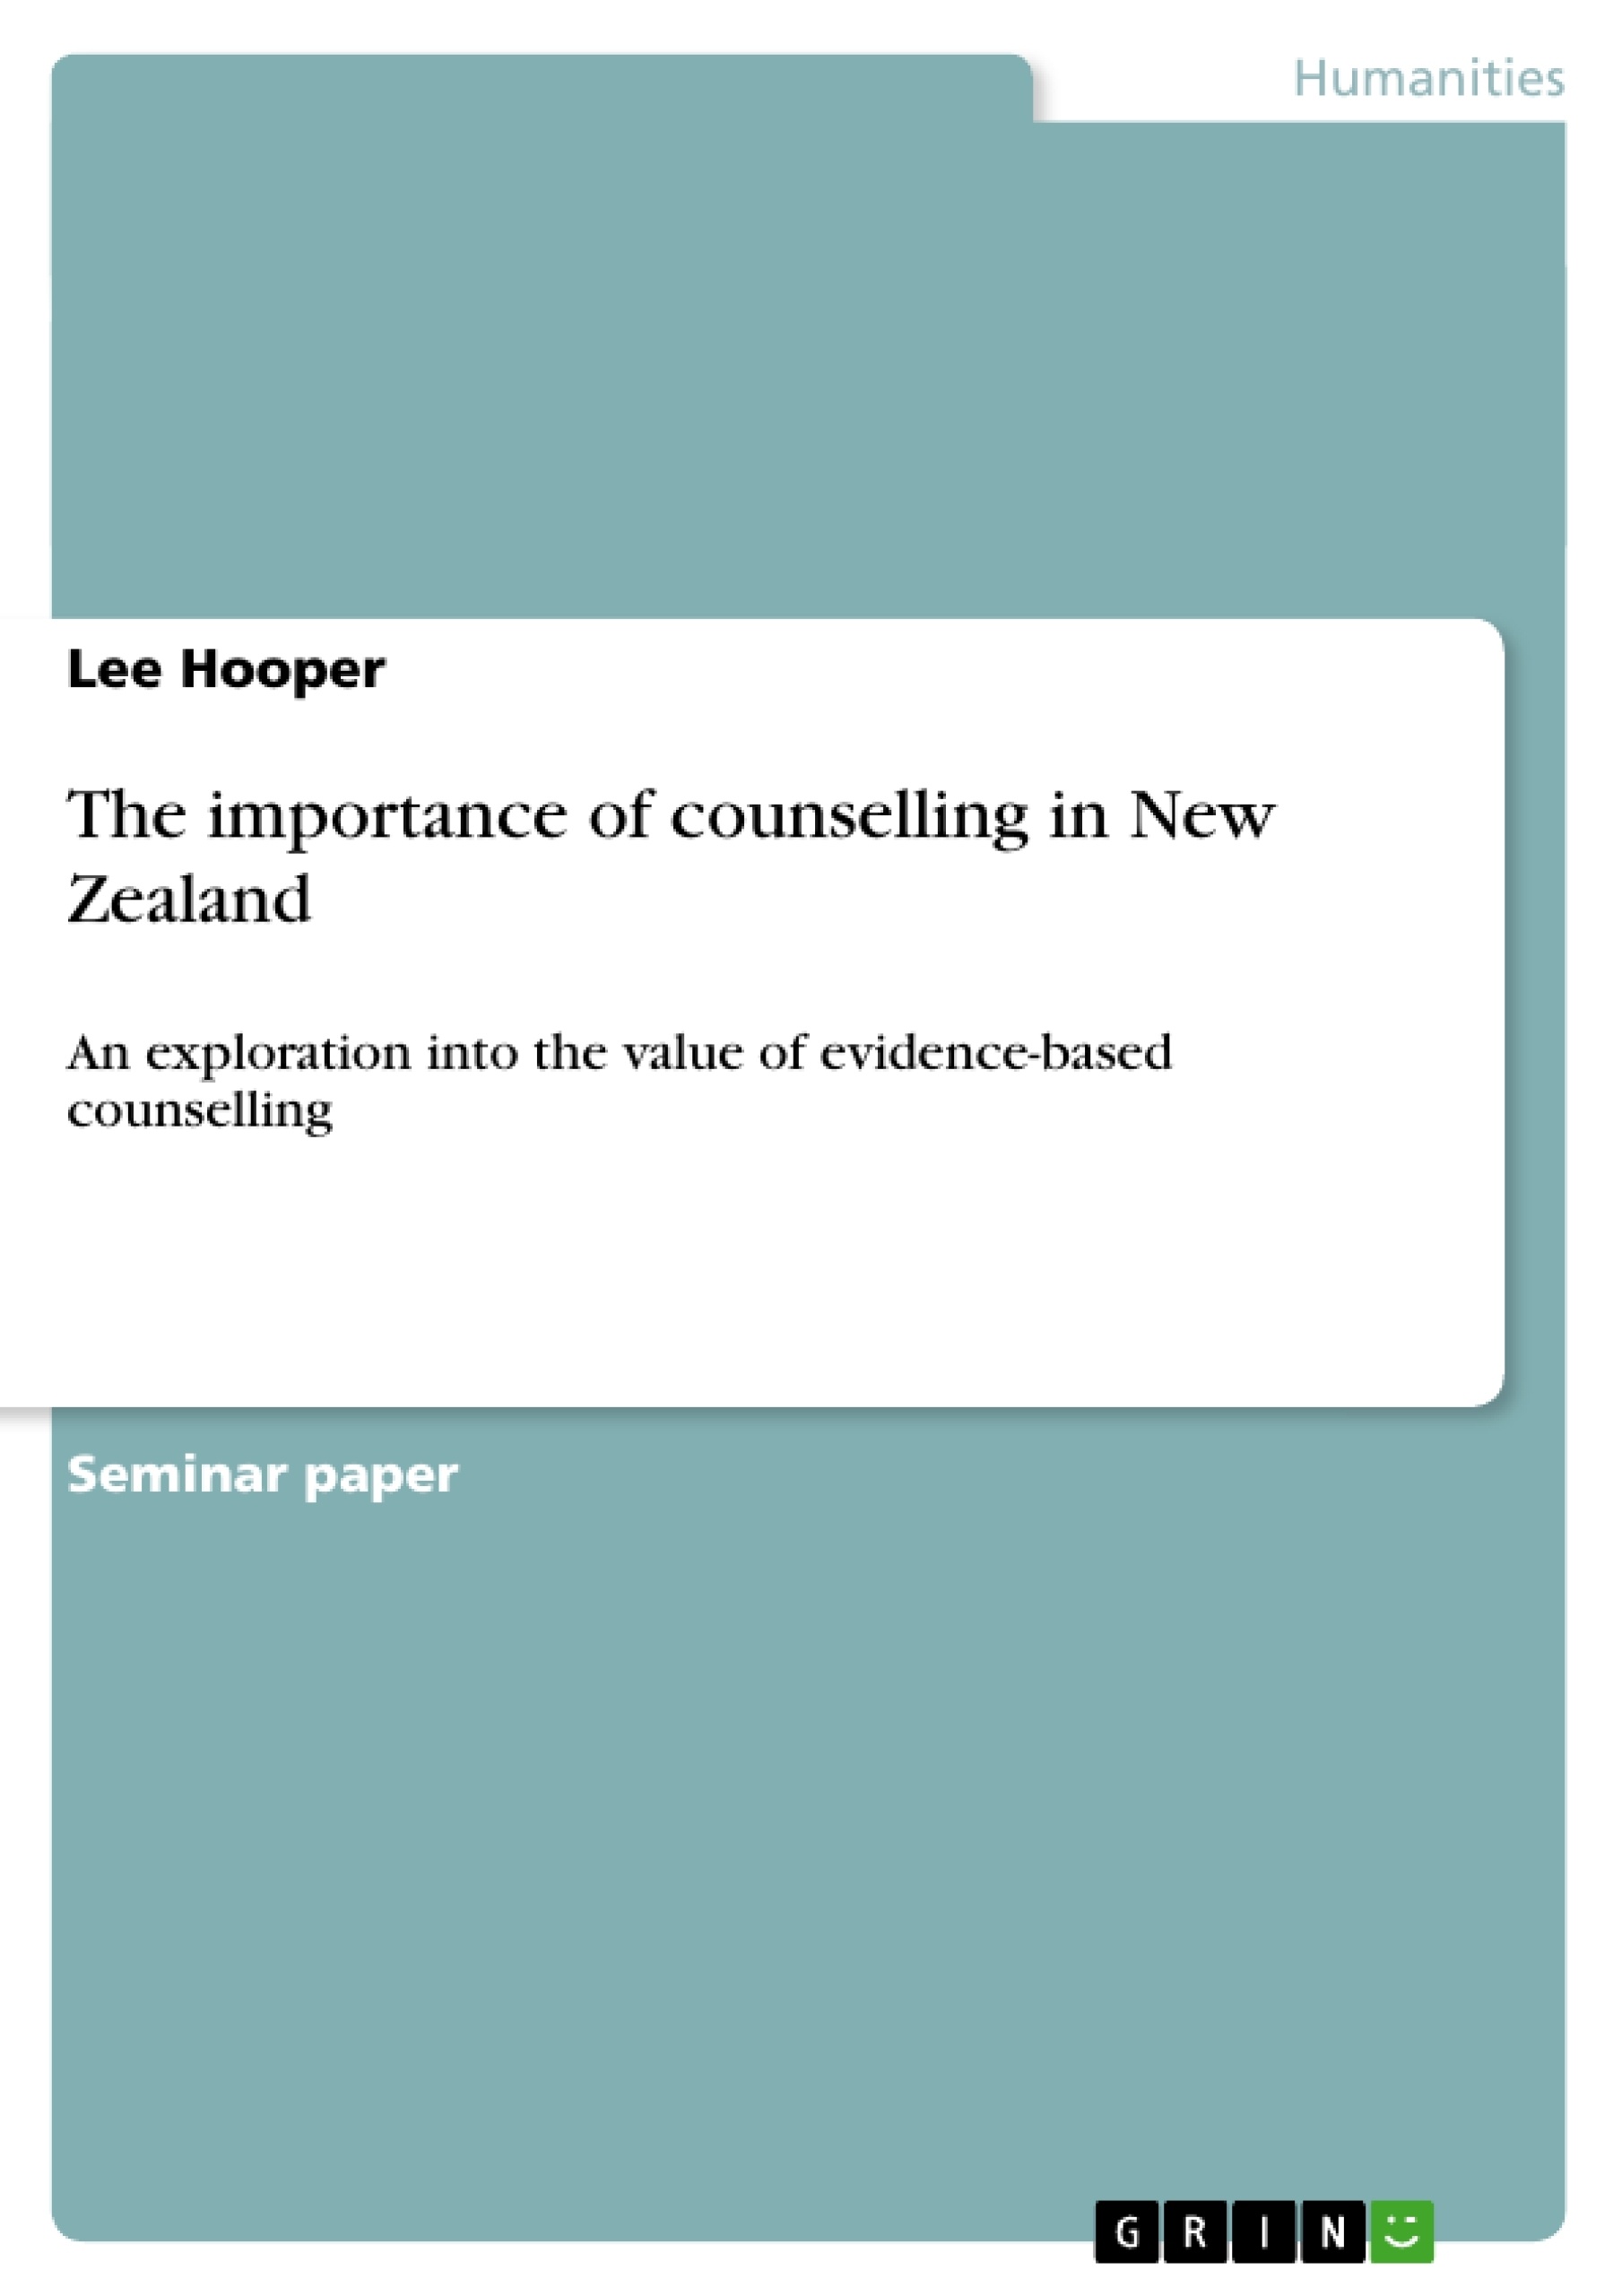 Title: The importance of counselling in New Zealand